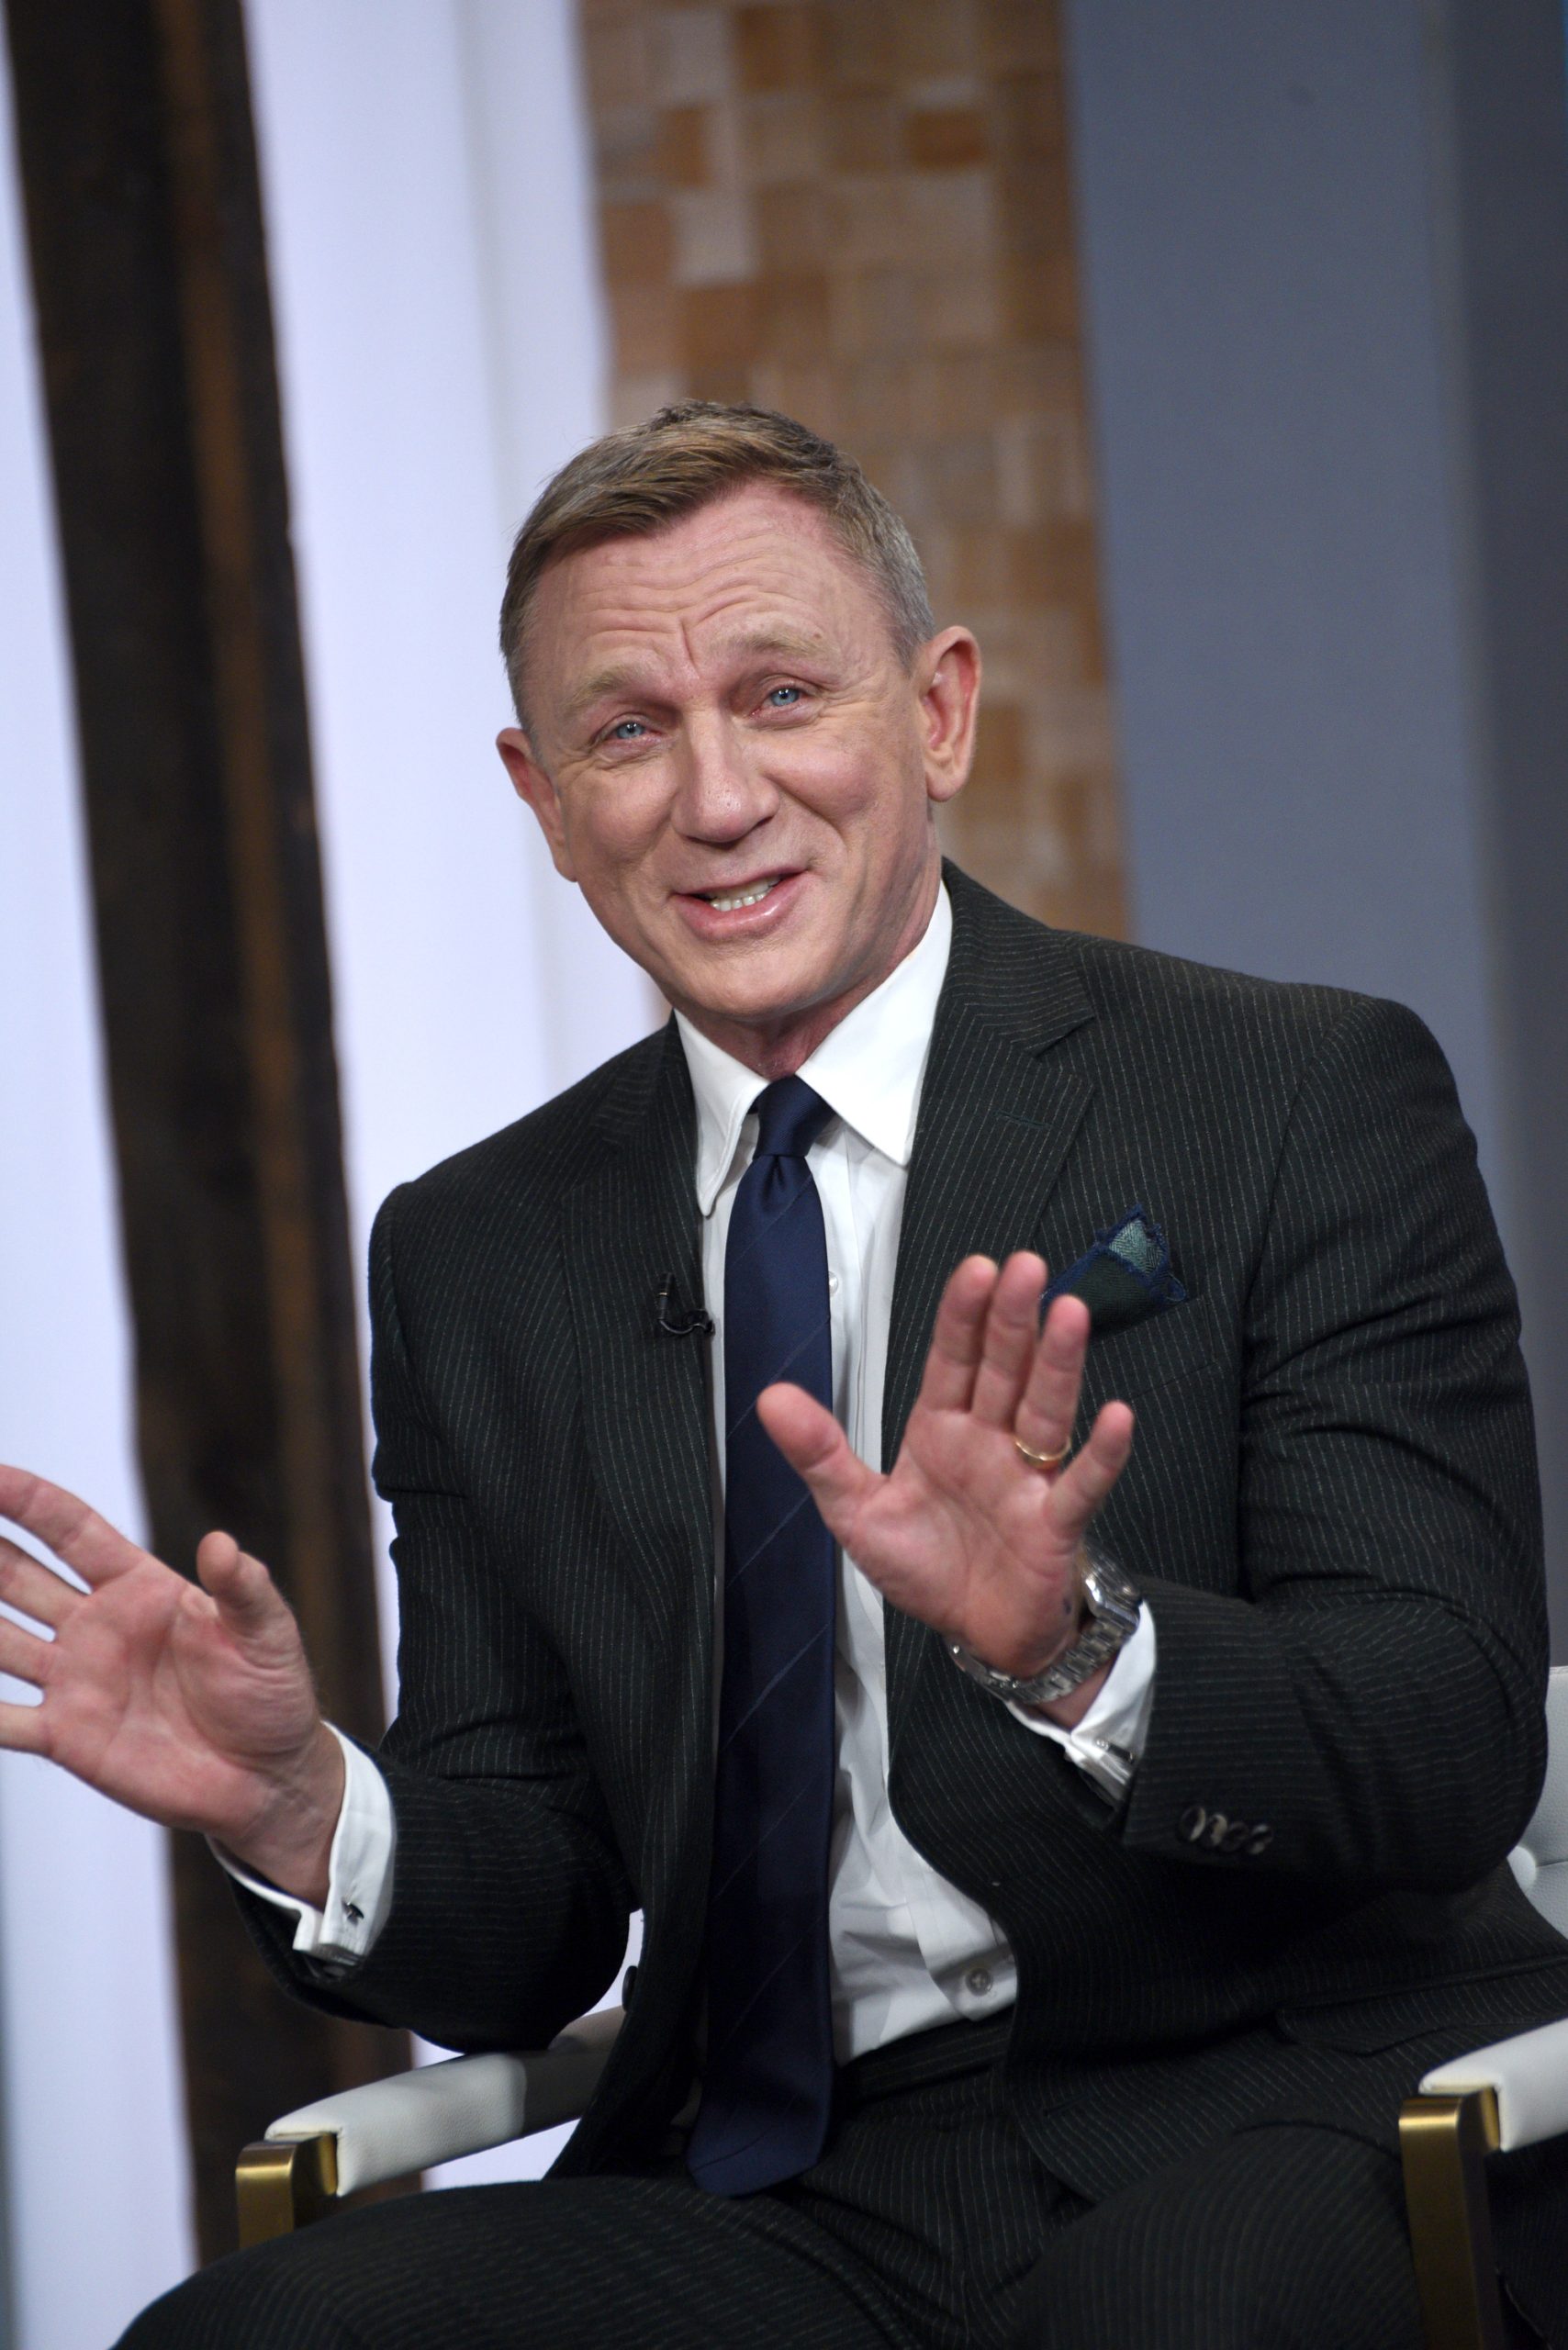 In Case You Missed It: Daniel Craig On ‘Good Morning America’